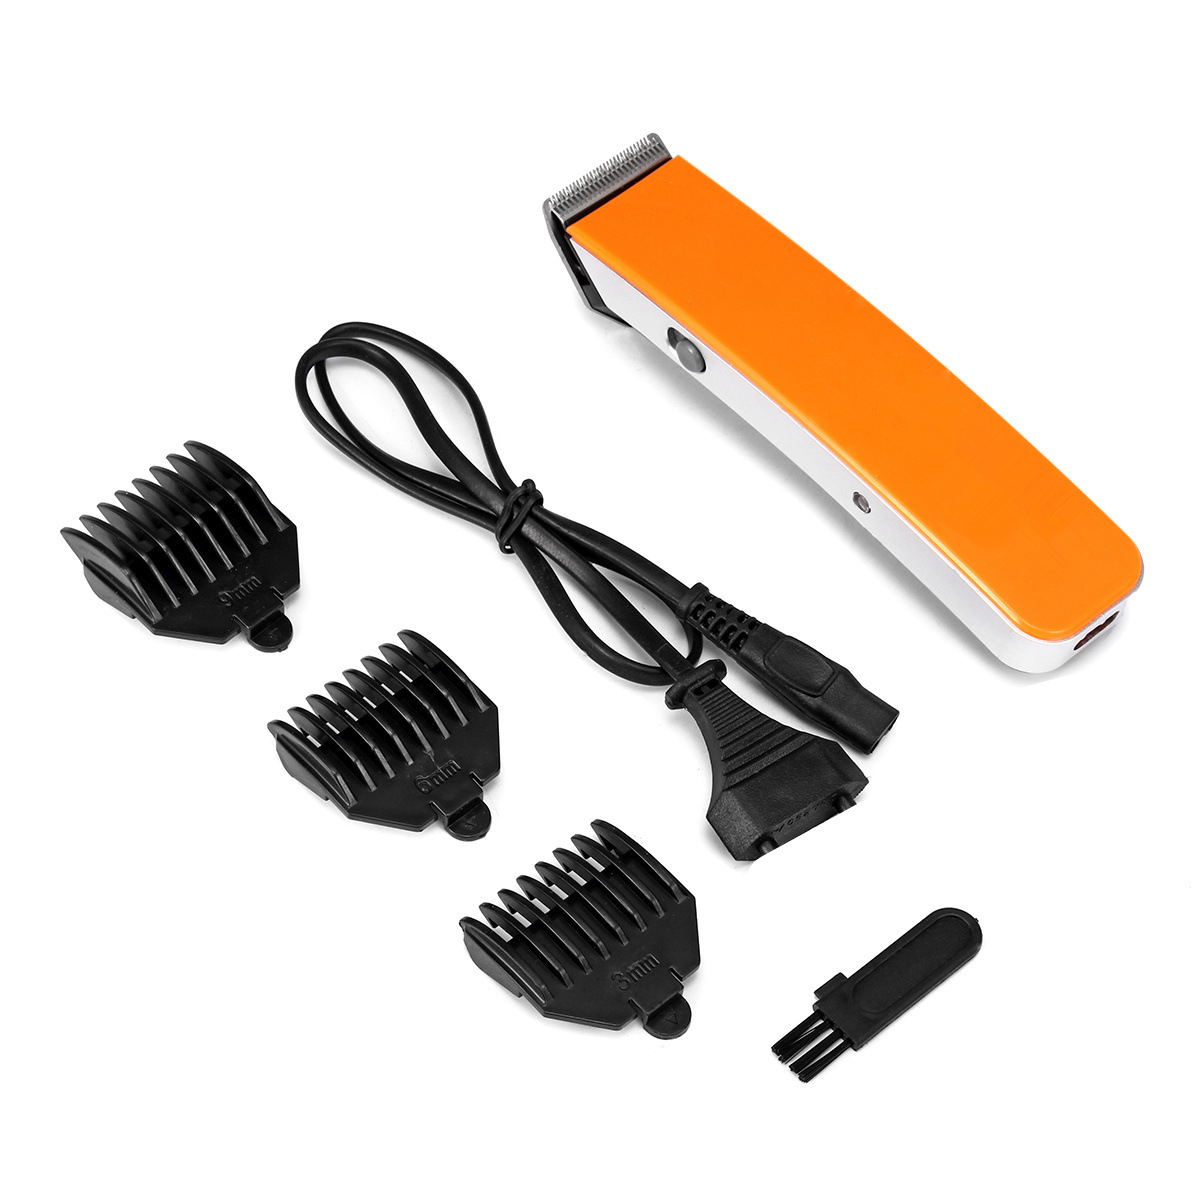 Rechargeable-Electric-Hair-Clipper-Cutter-Beard-Shaver-Razor-Trimmer-Groomer-1373096